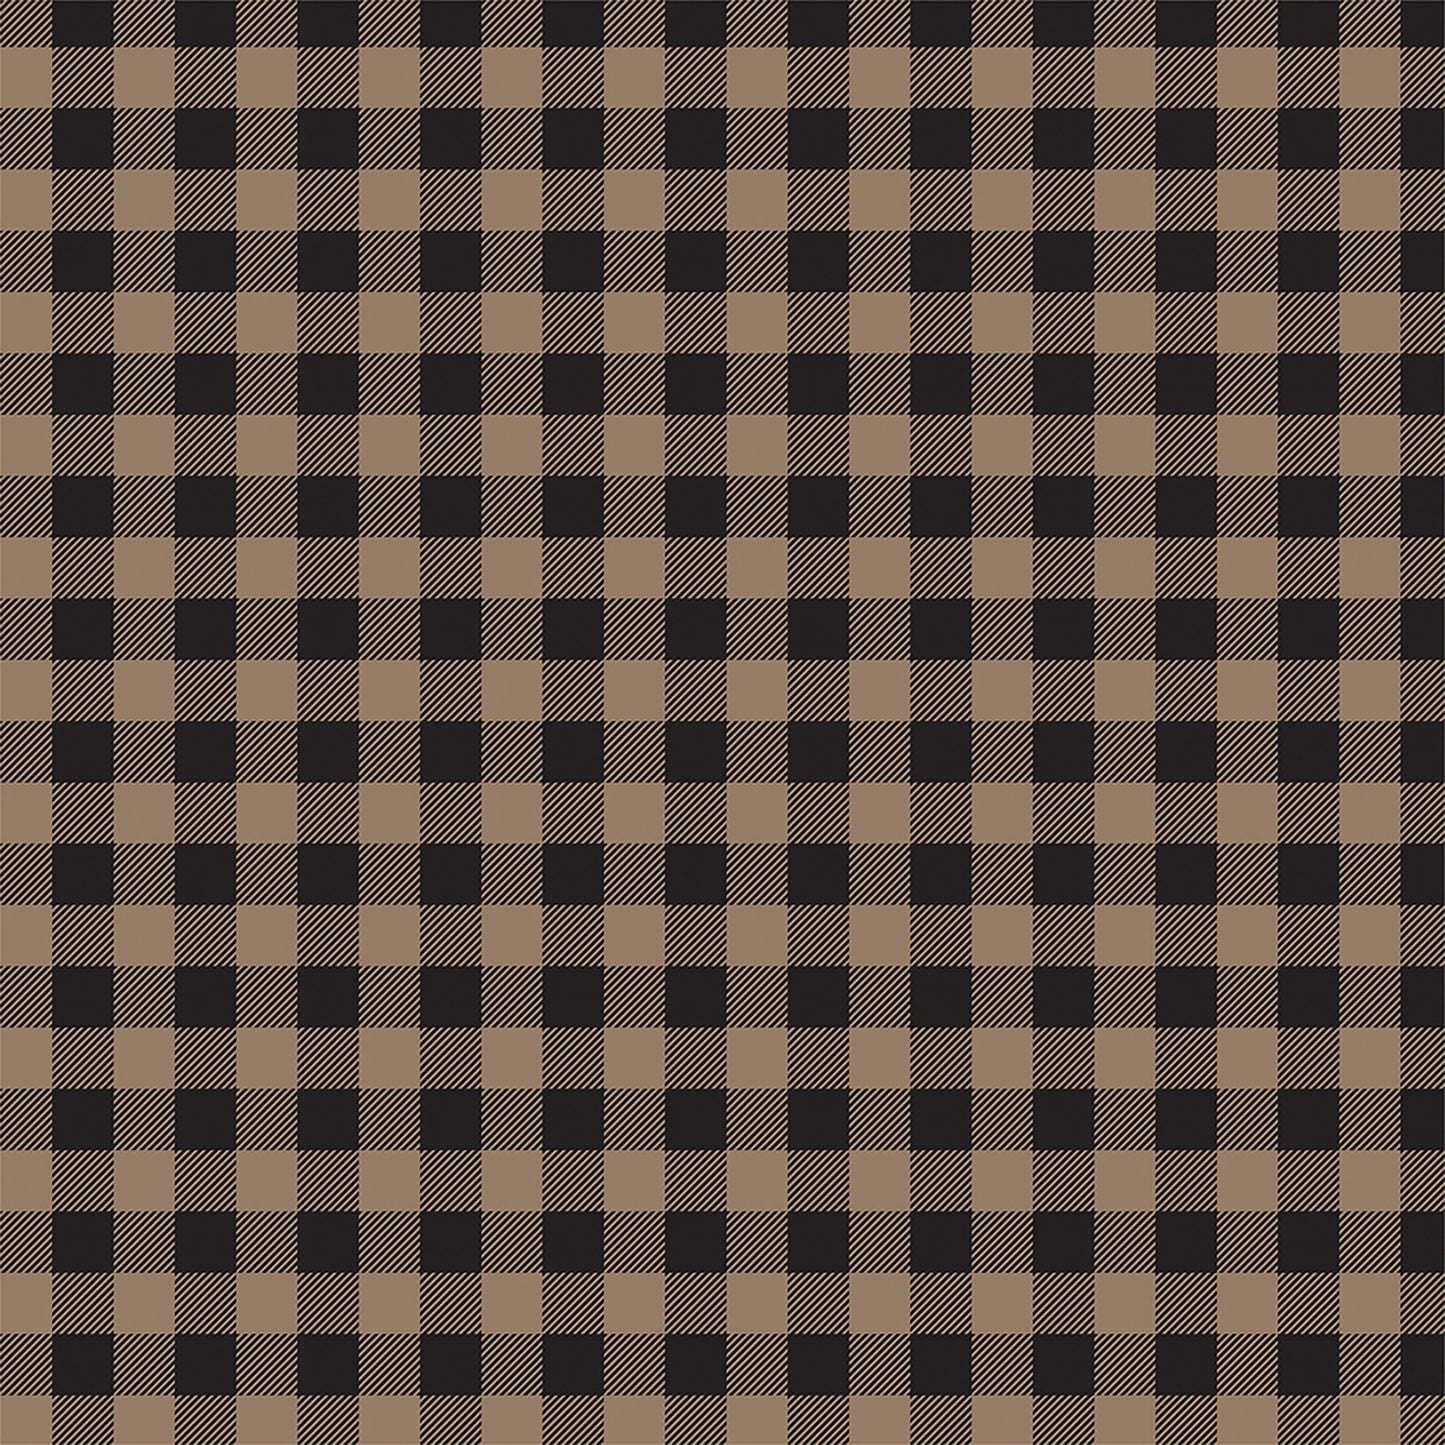 Brown and Black Buffalo Plaid Paper Double Sided 12x12 Scrapbook Paper